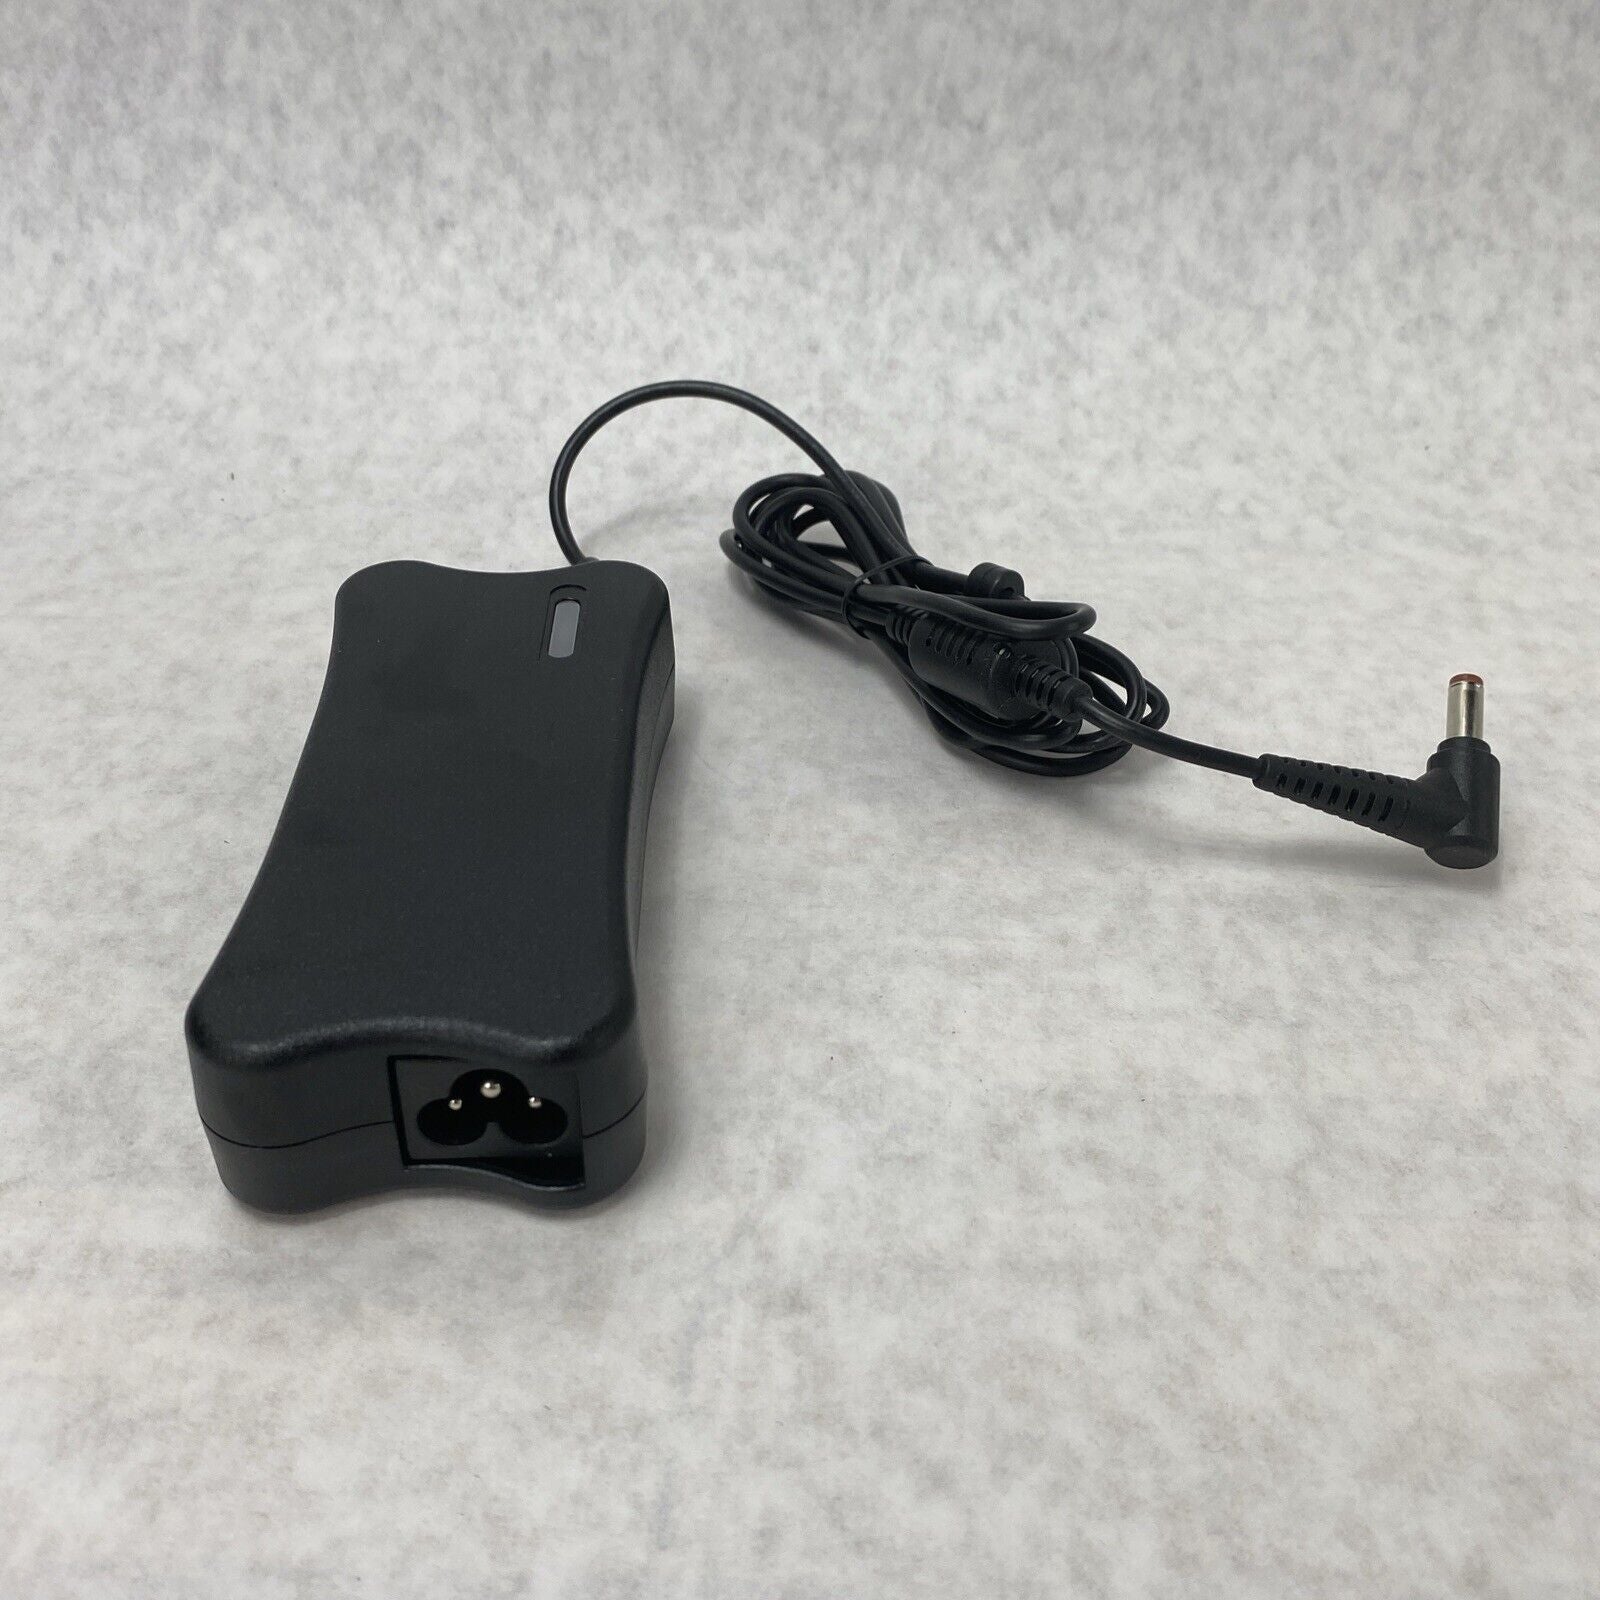 Genuine Lenovo ADP-65YB D 65W 20V 3.25A AC/DC Adapter Laptop Charger